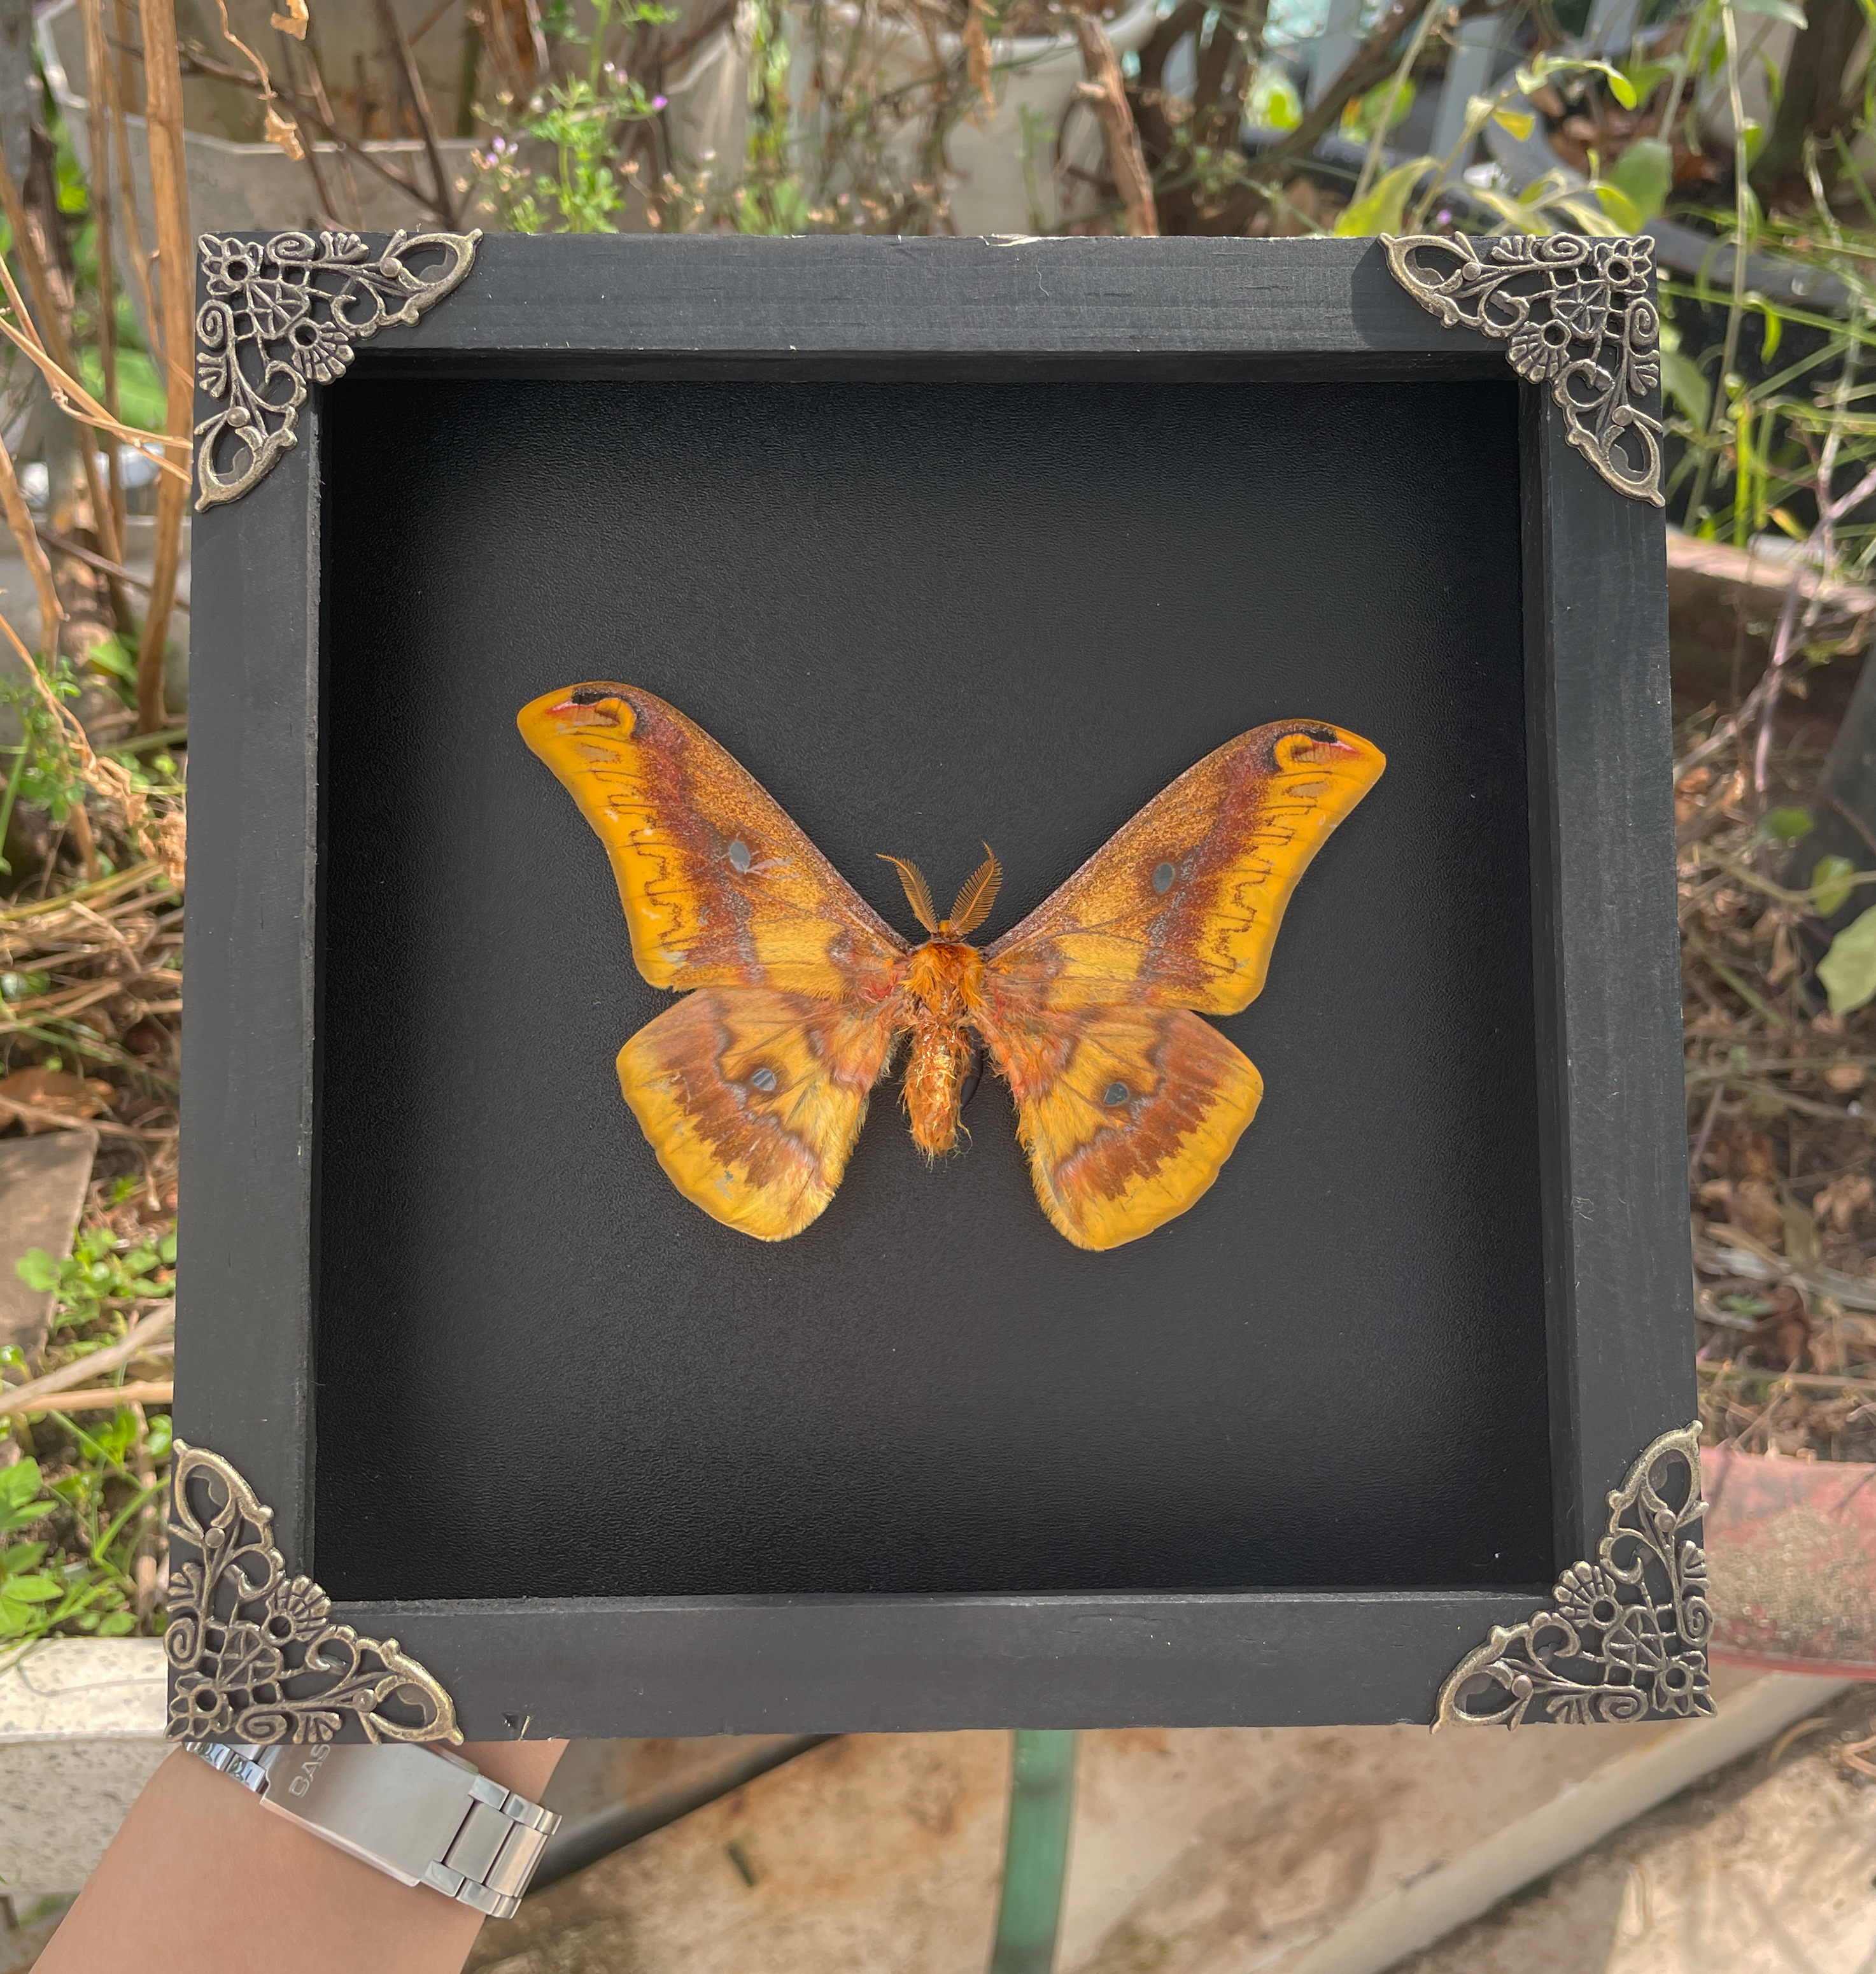 Real Moth Framed Taxidermy Insect Wall Art Decor Butterfly Entomology Shadow Box